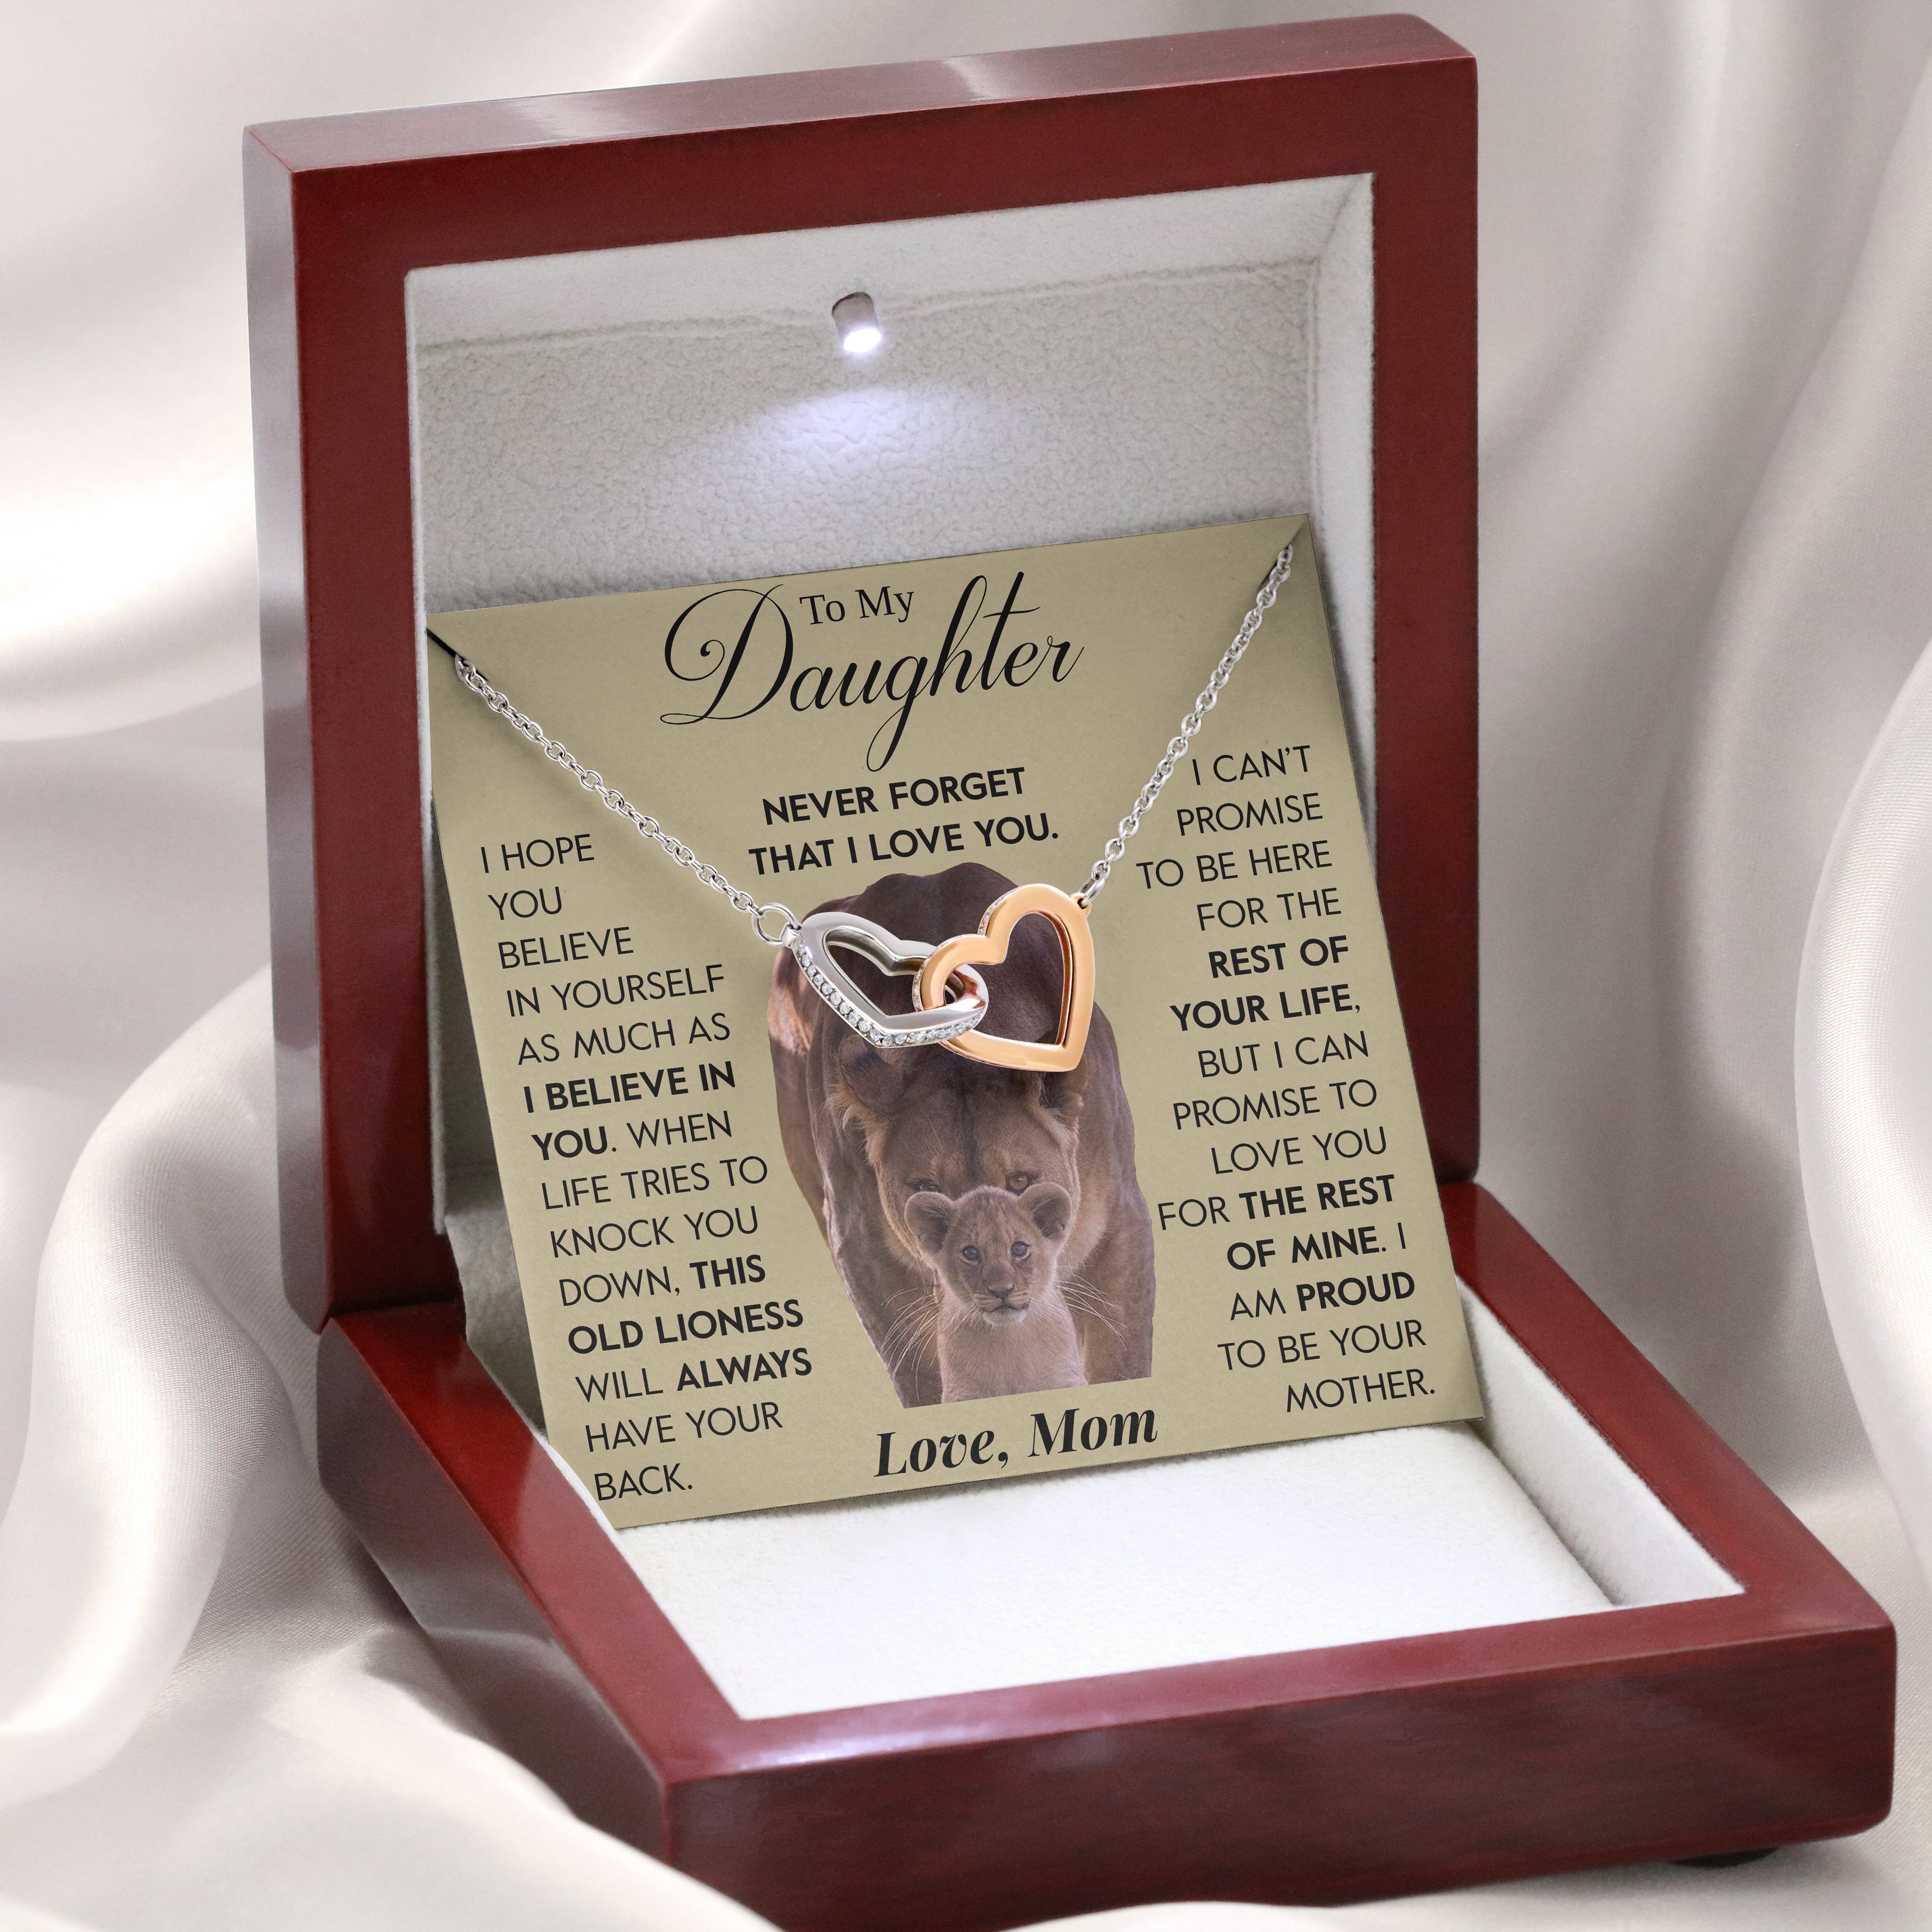 To My Daughter | "This Old Lioness" | Interlocking Hearts Necklace